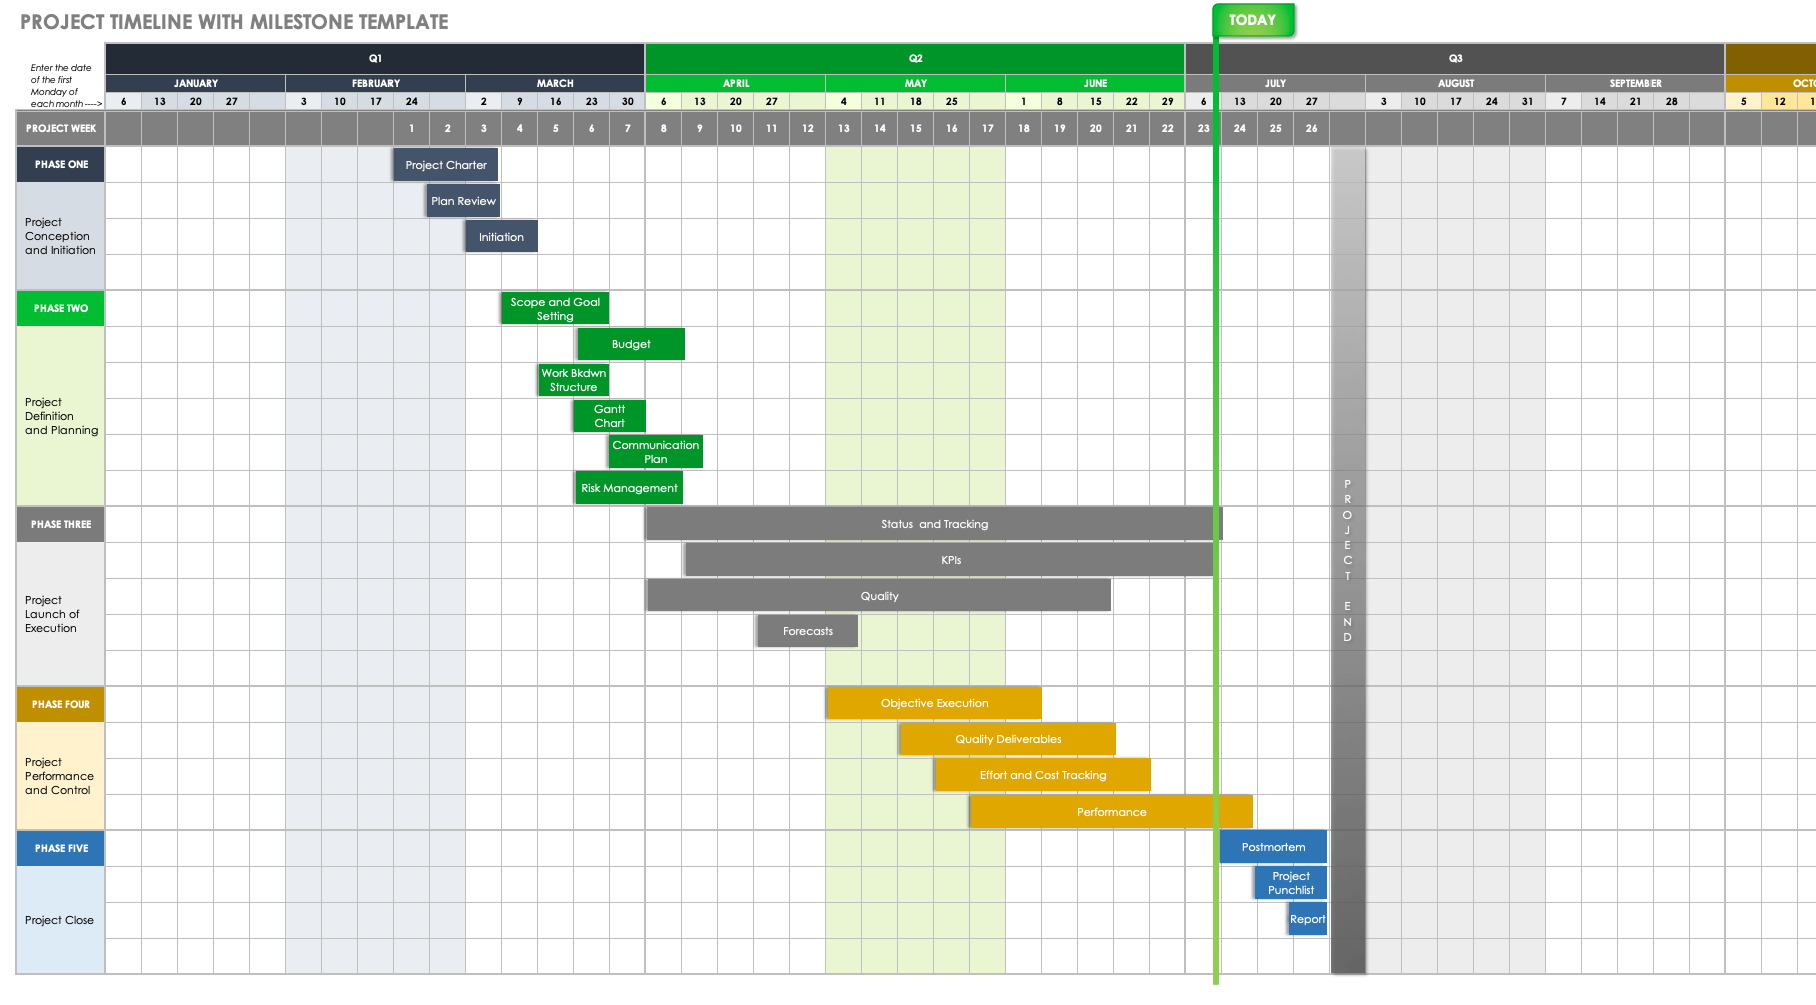 Project Timeline with Milestone Template